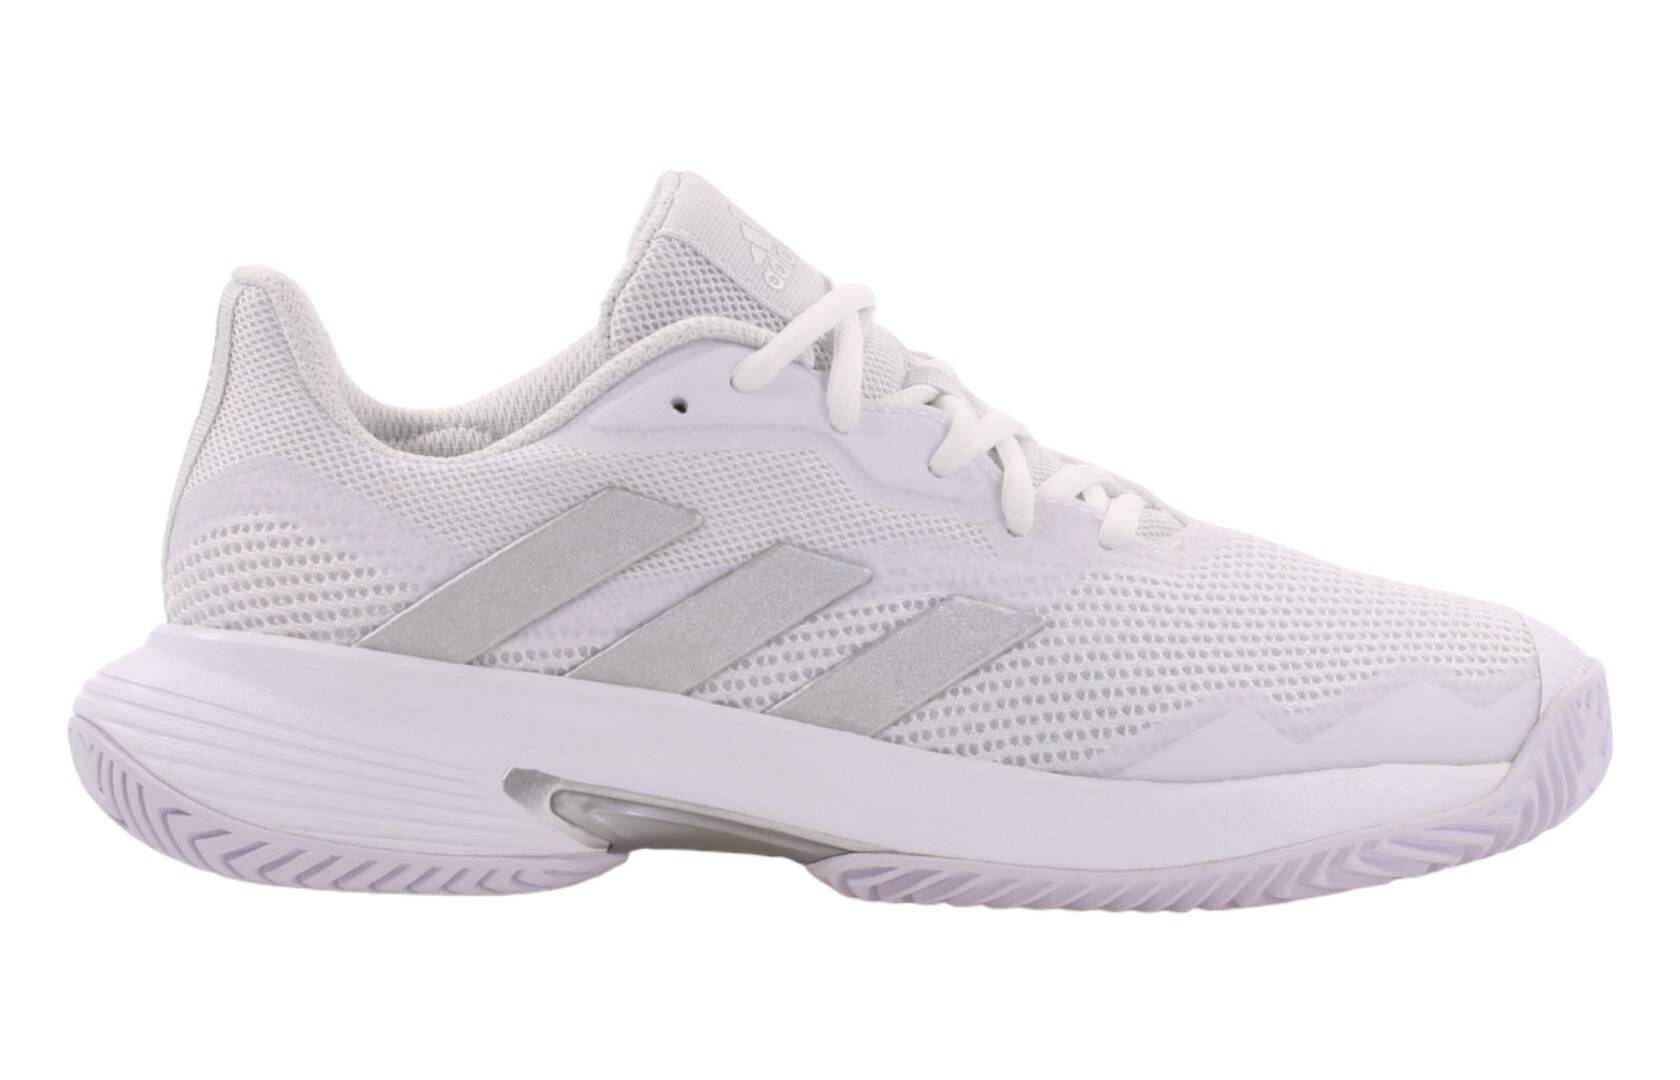 Adidas CourtJam Control W women's shoes GY1334